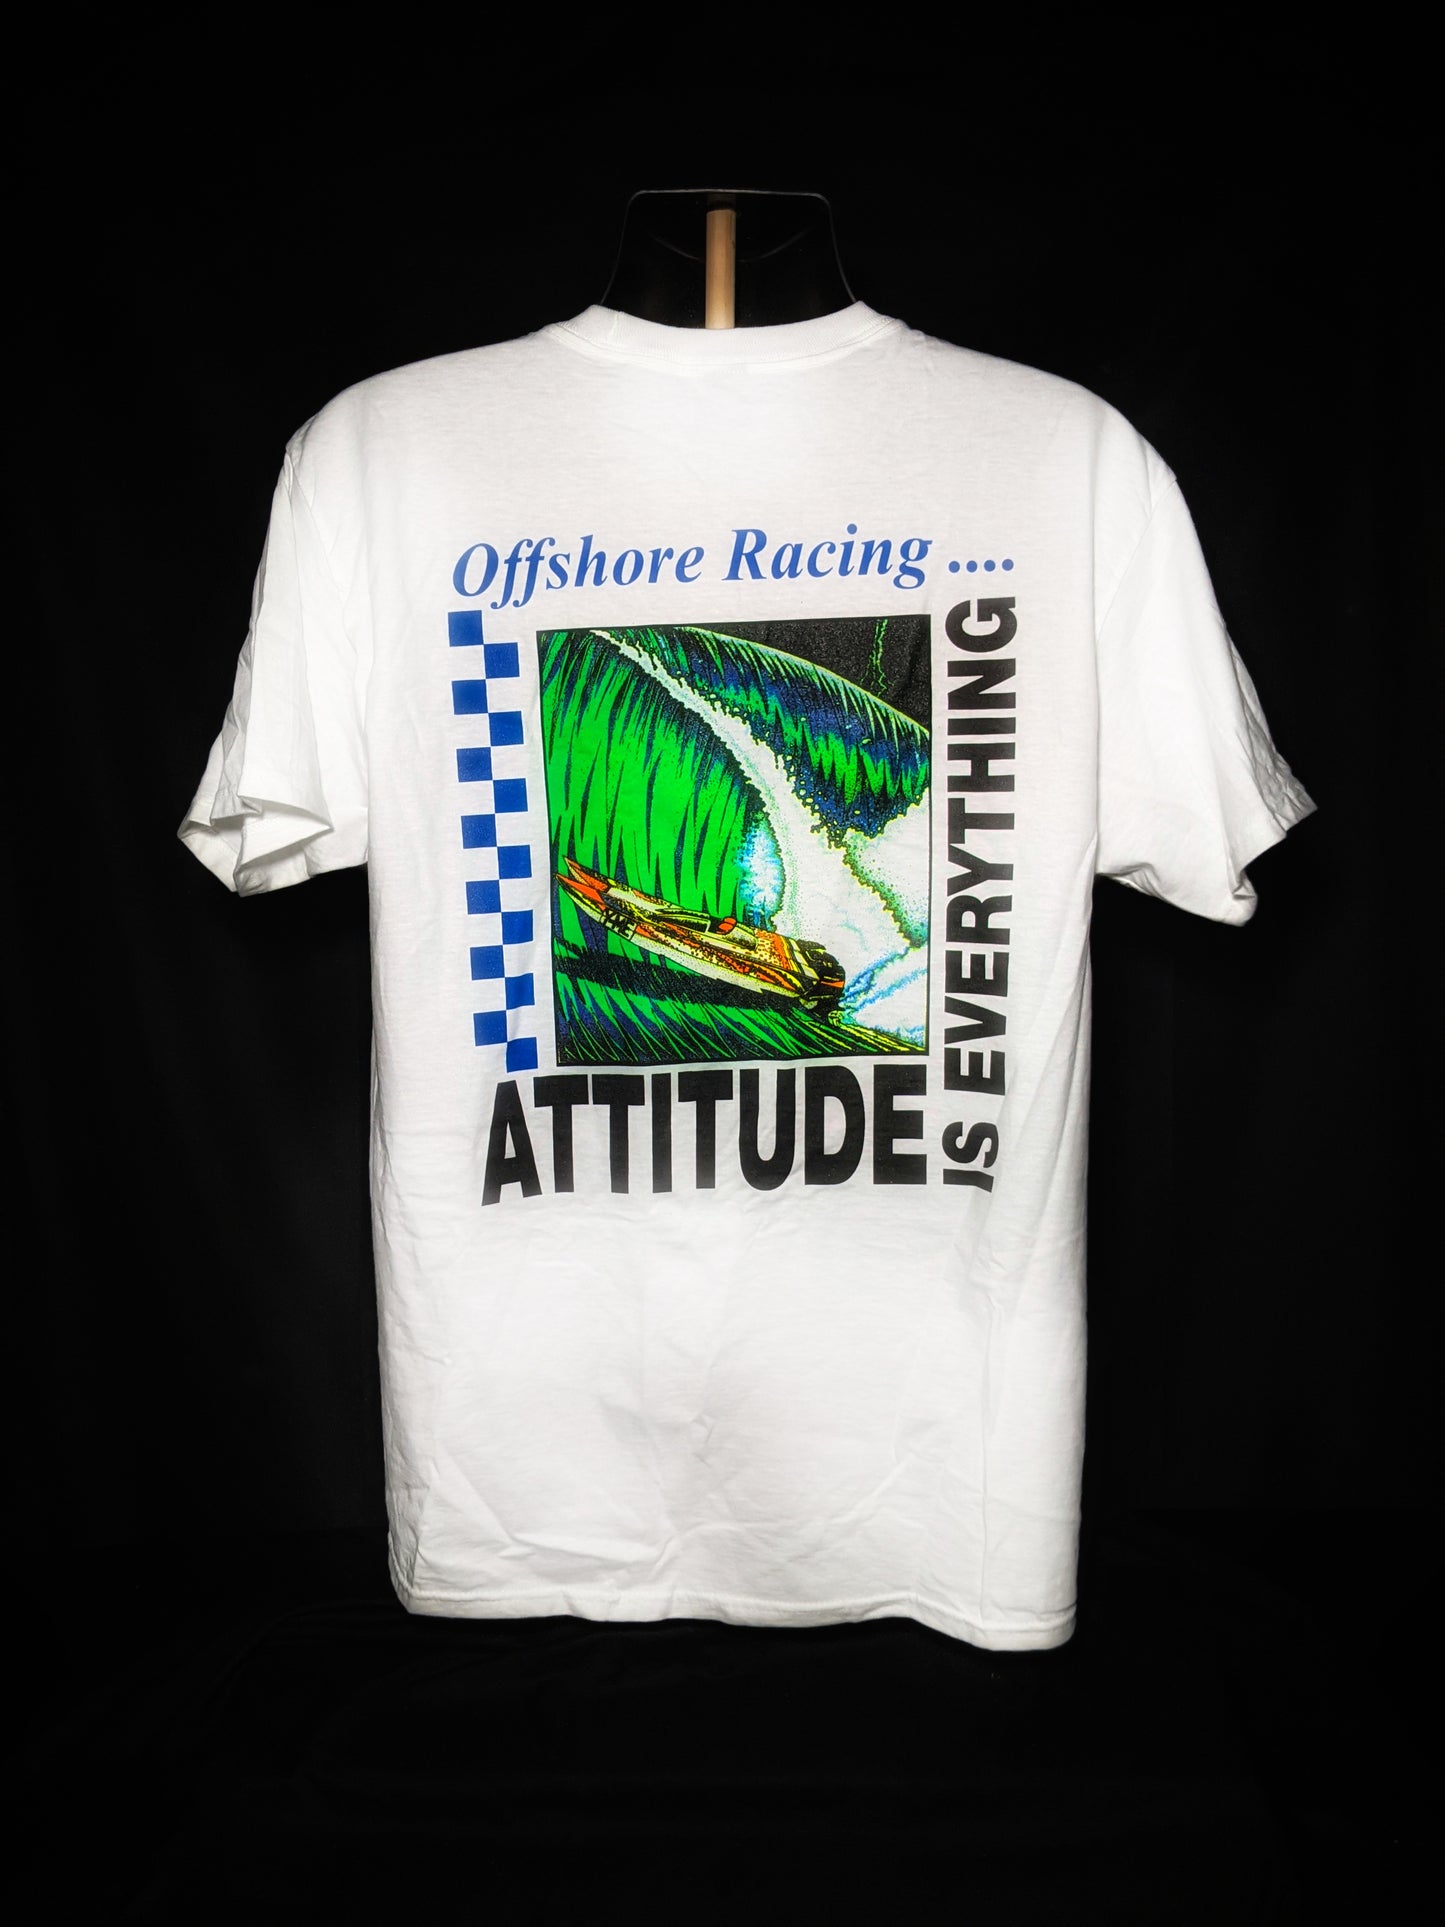 Attitude is Everything Offshore Racing Hanes Beefy-T shirt Large size